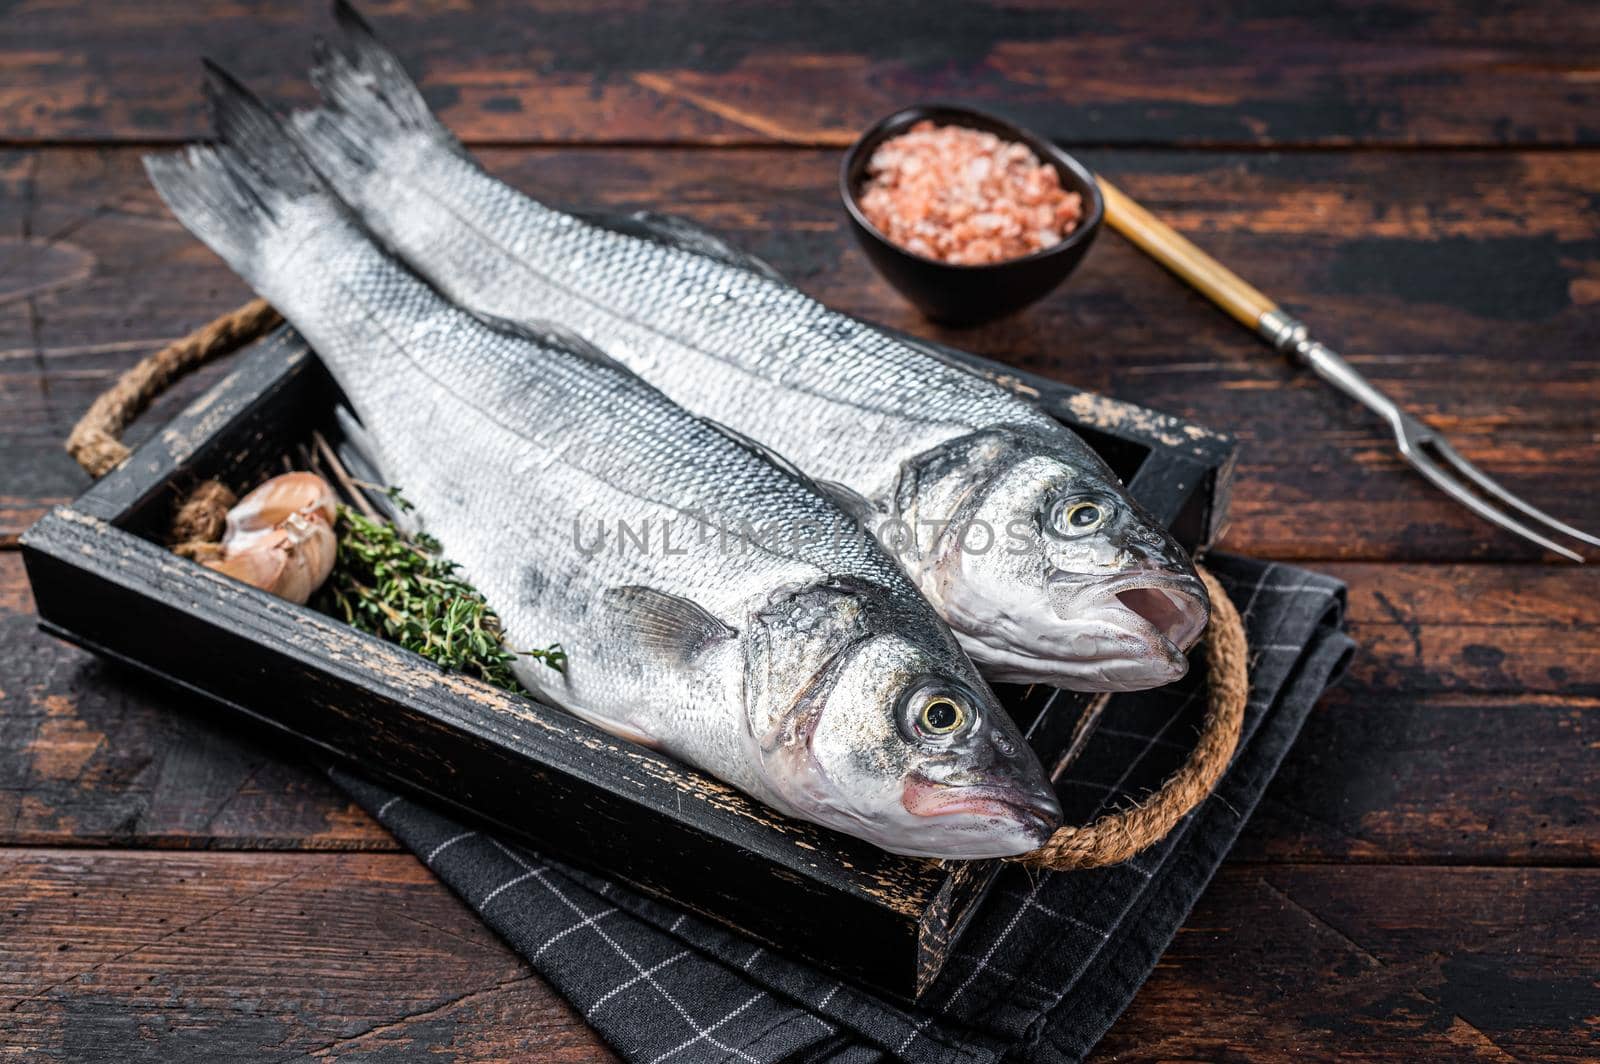 Seabass or sea bass raw fish in a wooden tray with herbs. Dark wooden background. Top view.